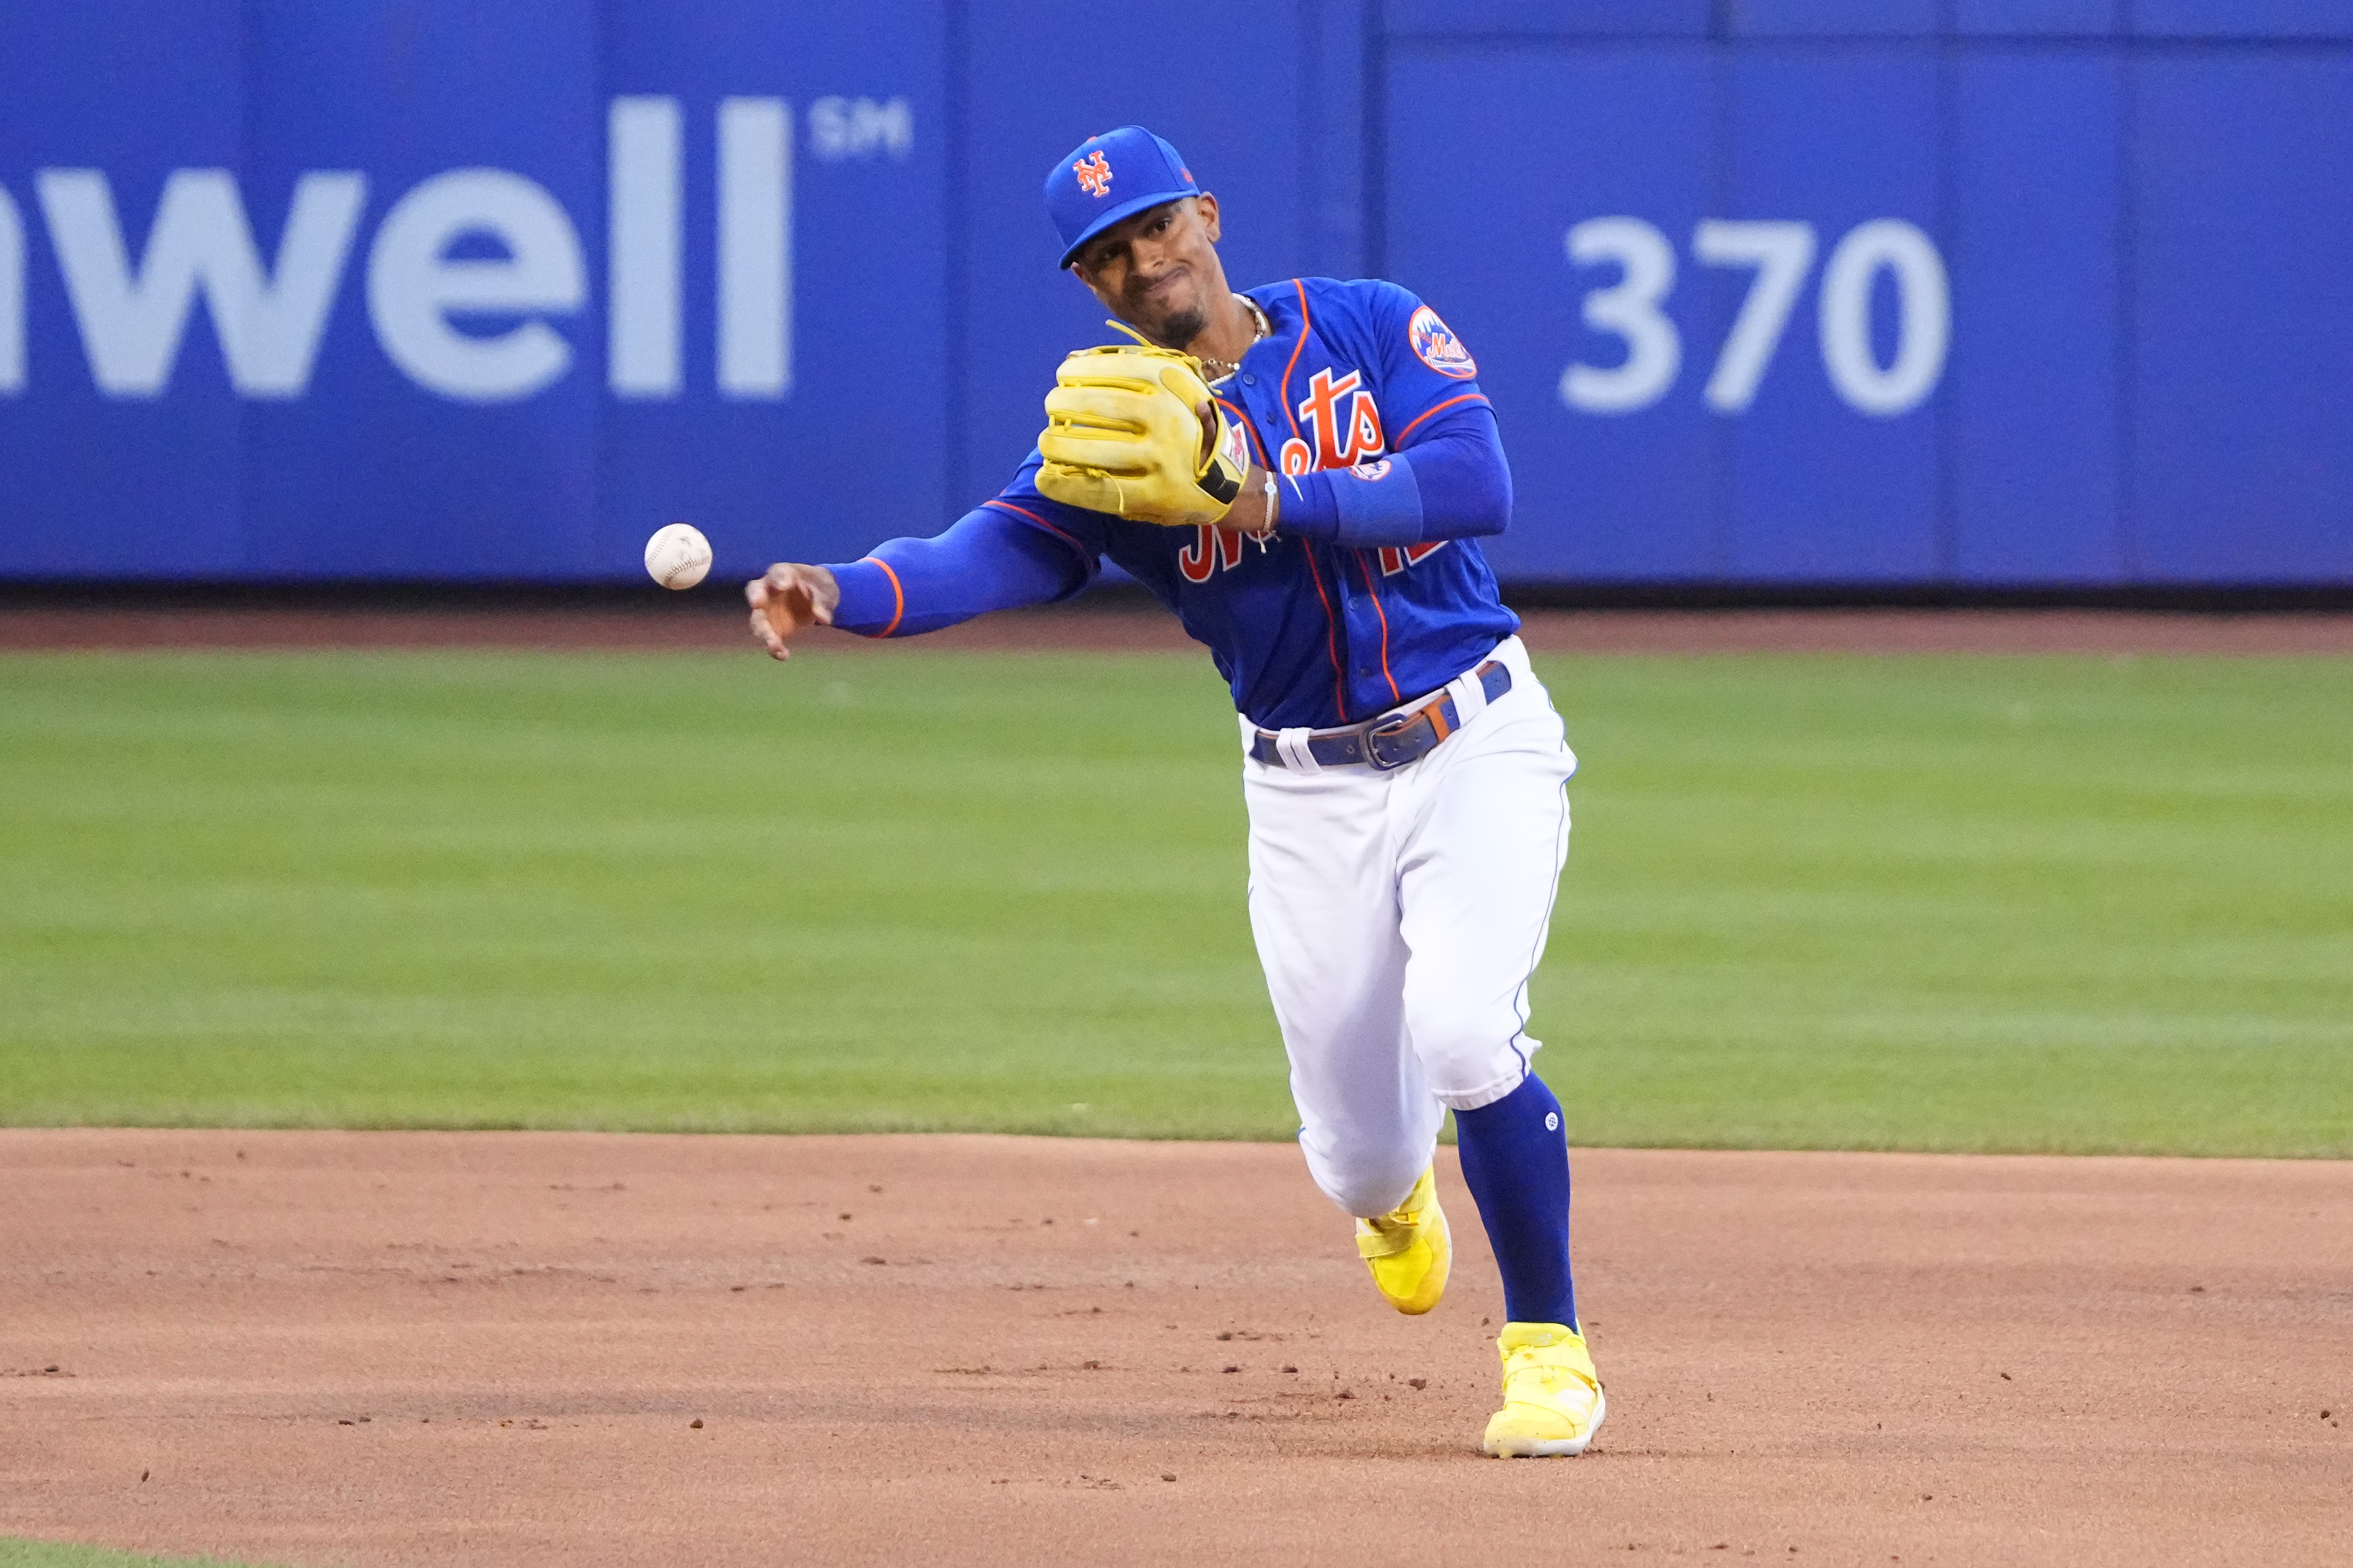 The New York Mets' Road to Perdition that led to the Braves' 21-3